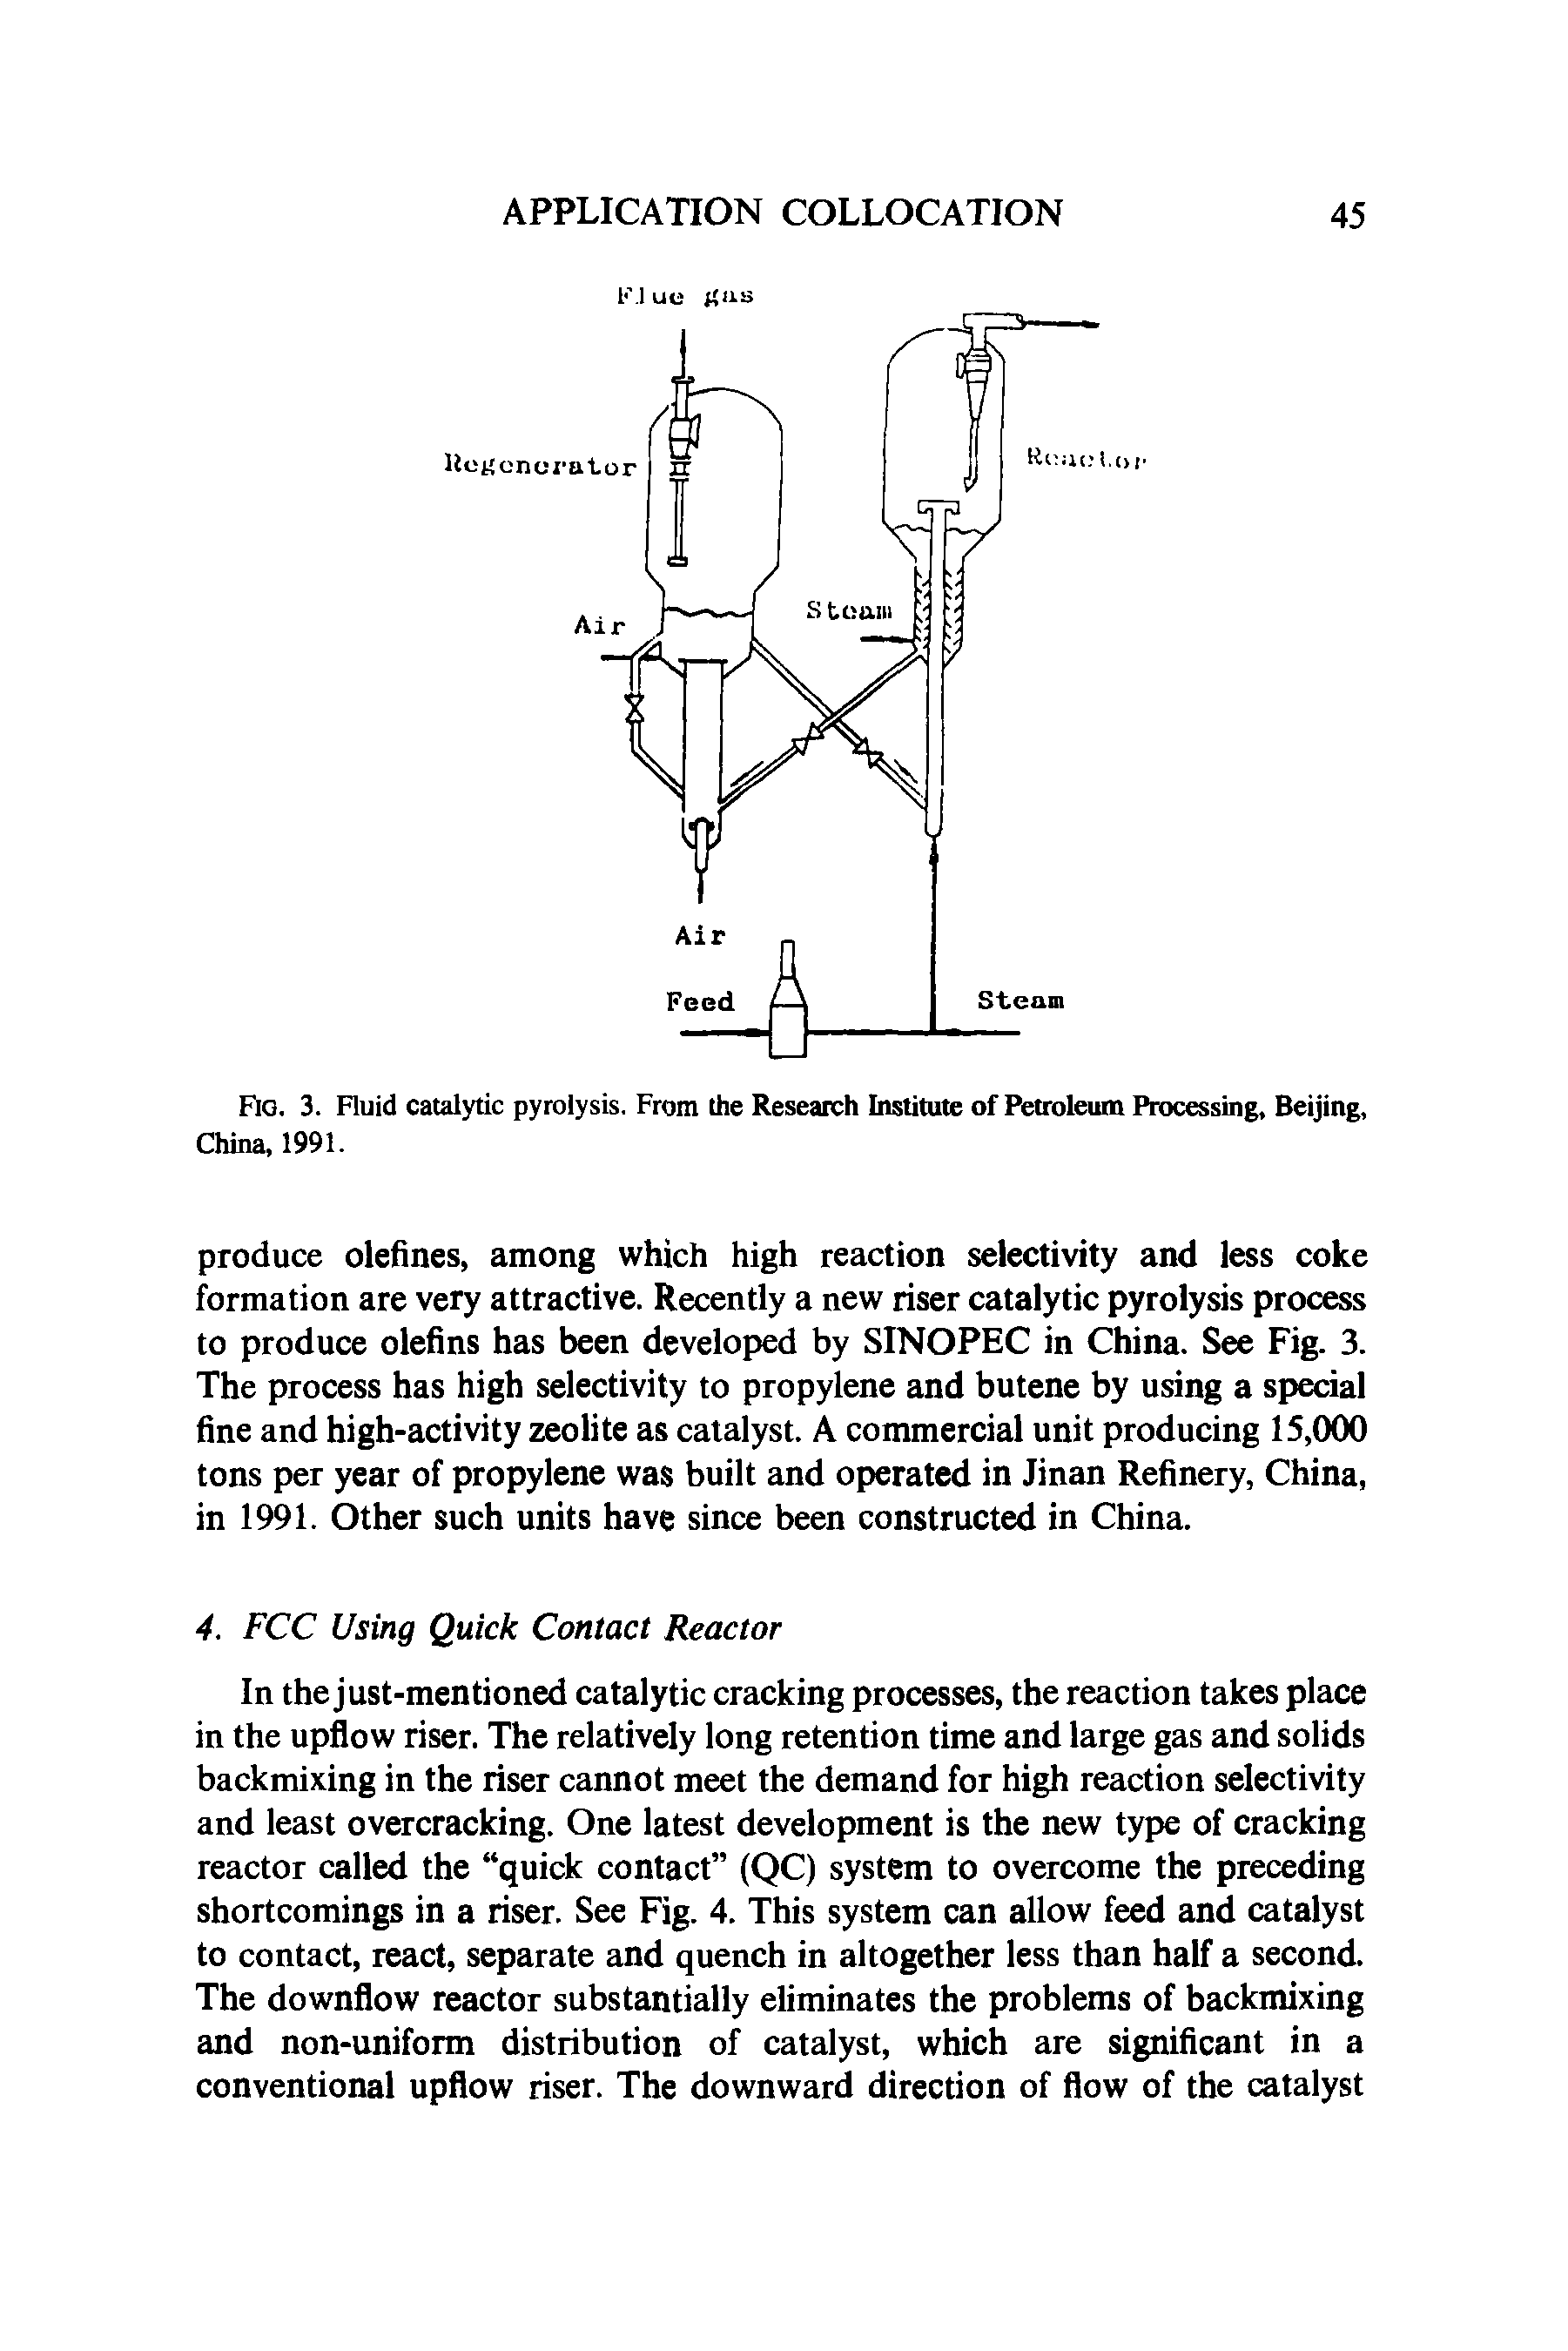 Fig. 3. Fluid catalytic pyrolysis. From the Research Institute of Petroleum Processing, Beijing, China, 1991.